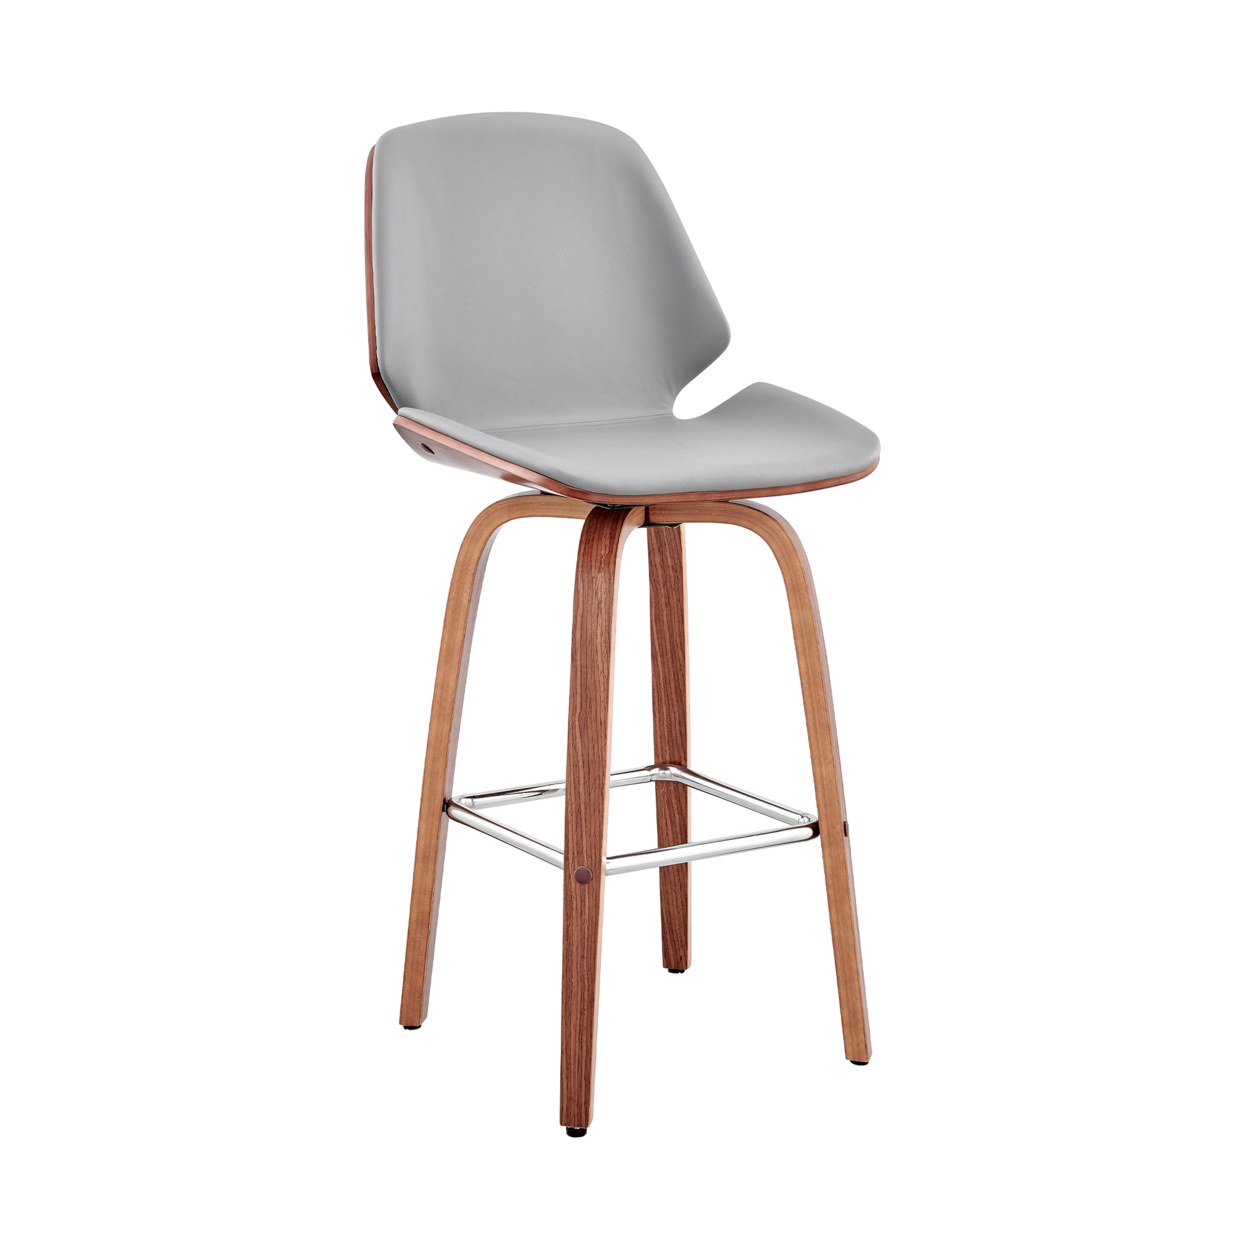 26 Inch Swivel Barstool With Leatherette Seat, Gray And Brown- Saltoro Sherpi